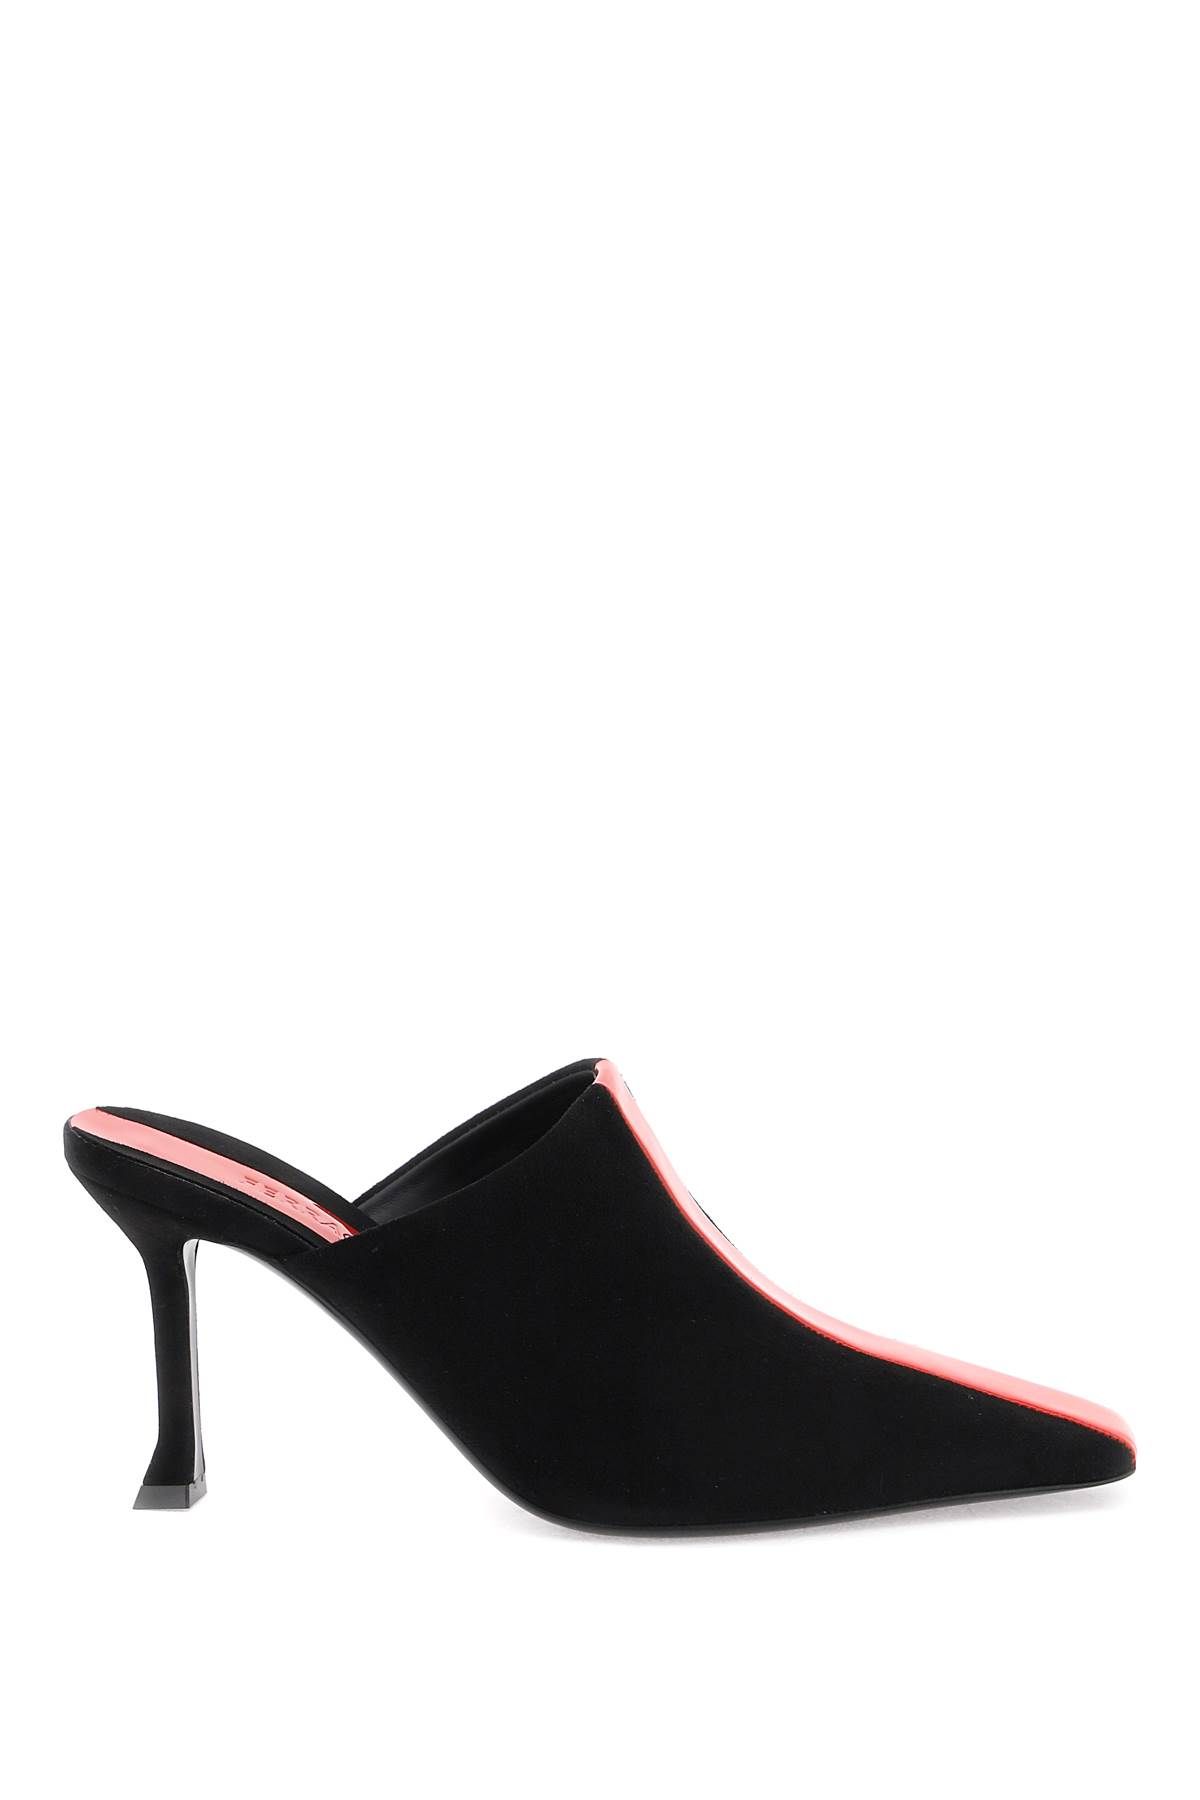 Shop Ferragamo Mules With Graphic Inset In Black,red